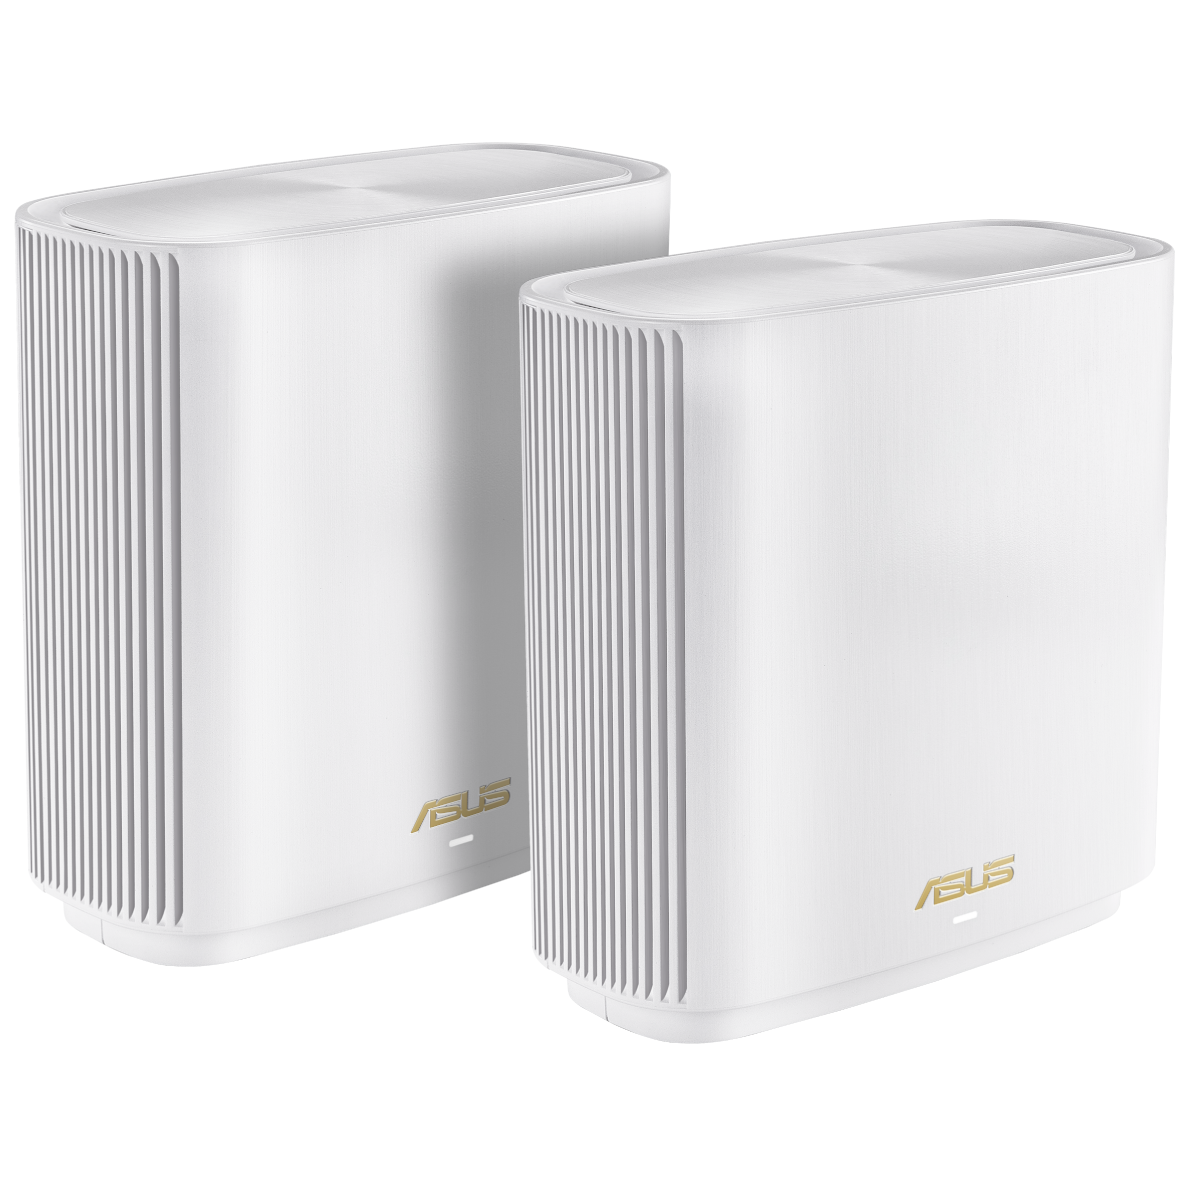  - ASUS ZenWifi AX (XT8) AX6600 WiFi 6 Mesh System, Pack of 2 - White